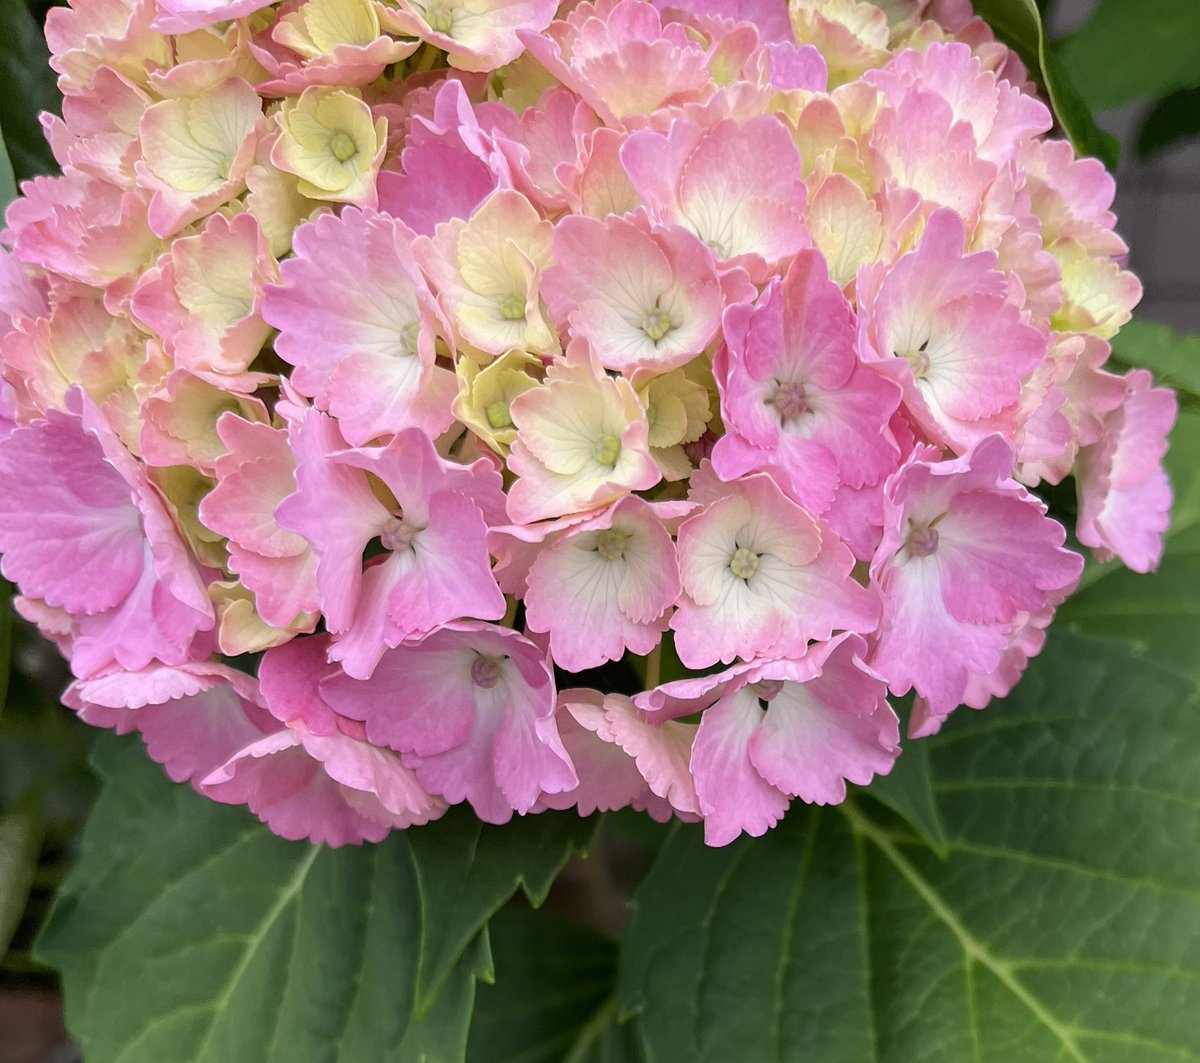 …not looking like my tole painting 🎨is going to make it in time for this year either 🤷🏽‍♀️ the hydrangeas are already in season ✨
#onmywaytowork